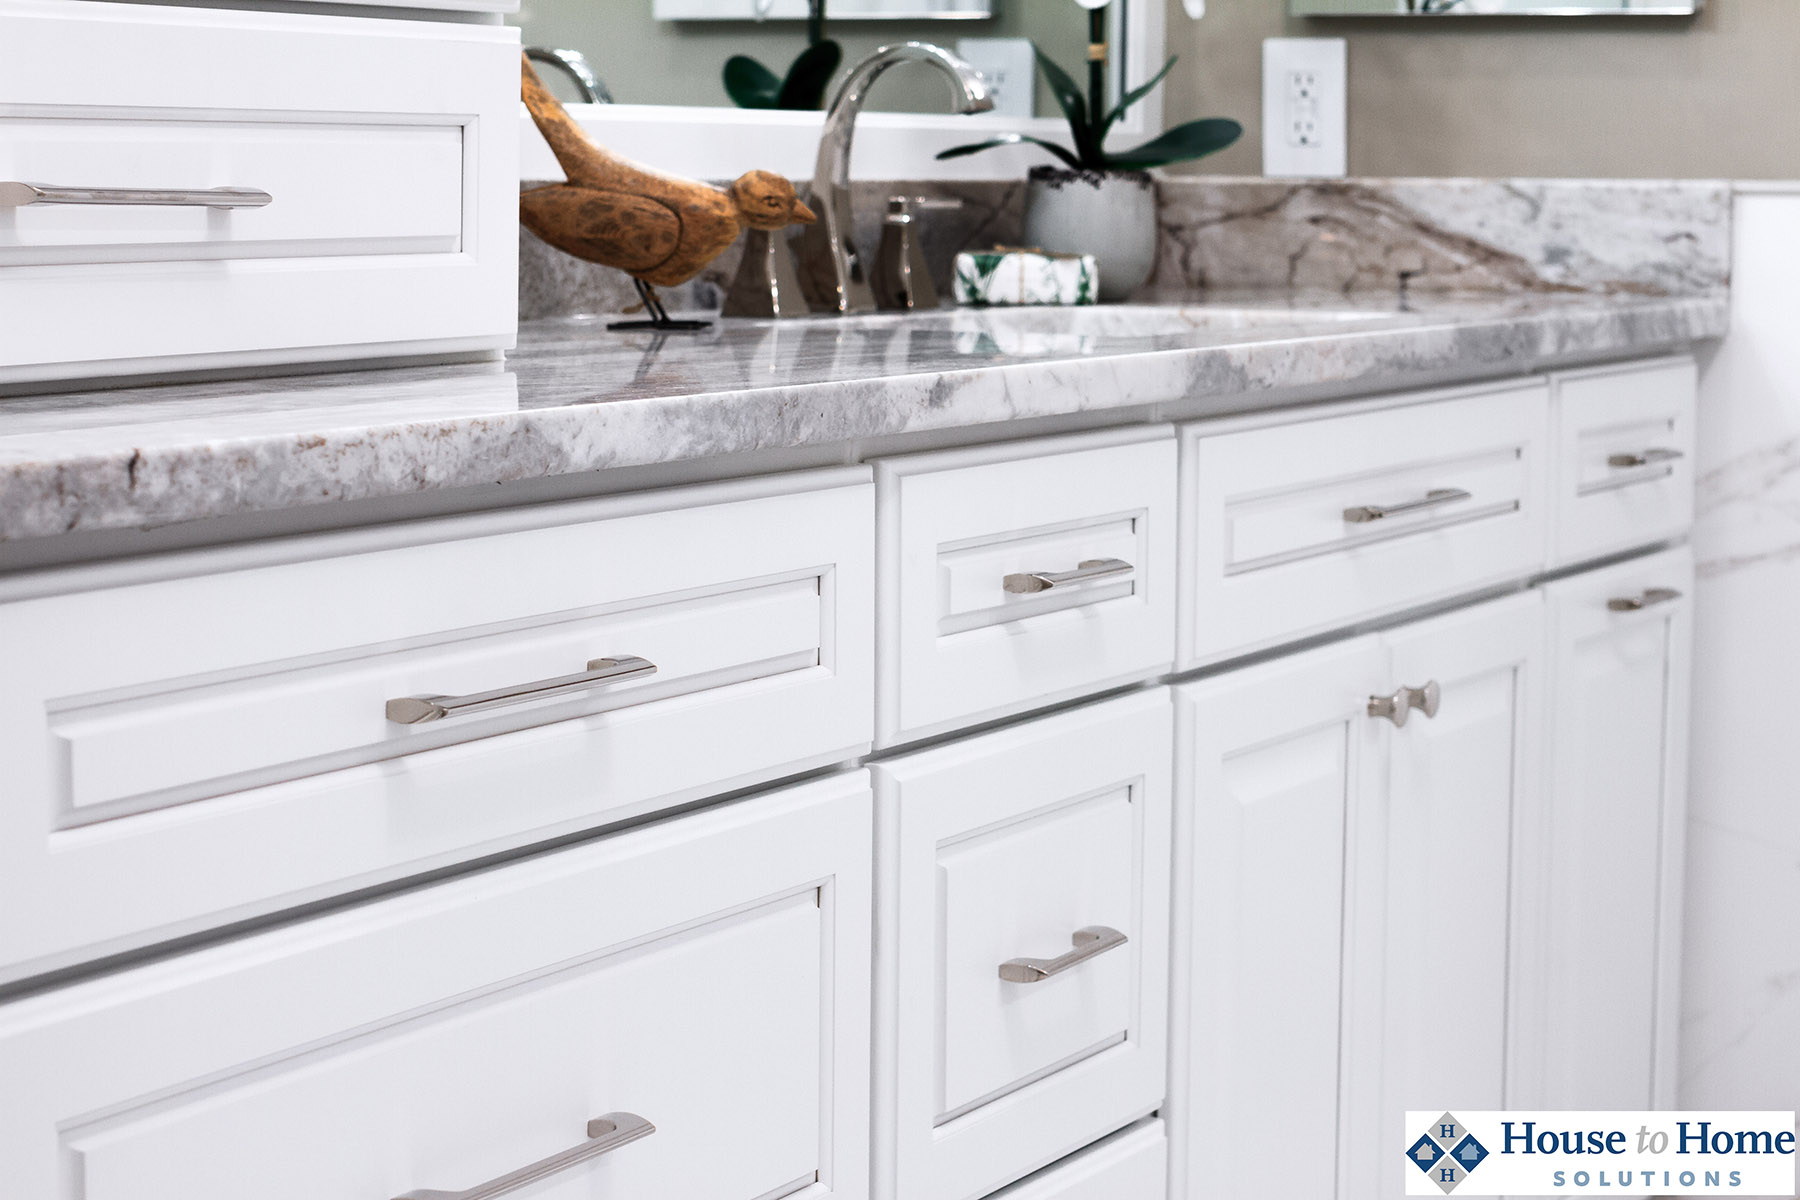 This customer is very happy with their new white painted bathroom vanity. Browse these bathroom cabinet reviews to see more kitchen and bathroom cabinetry testimonies from homeowners on their remodel projects with Dura Supreme Cabinetry.